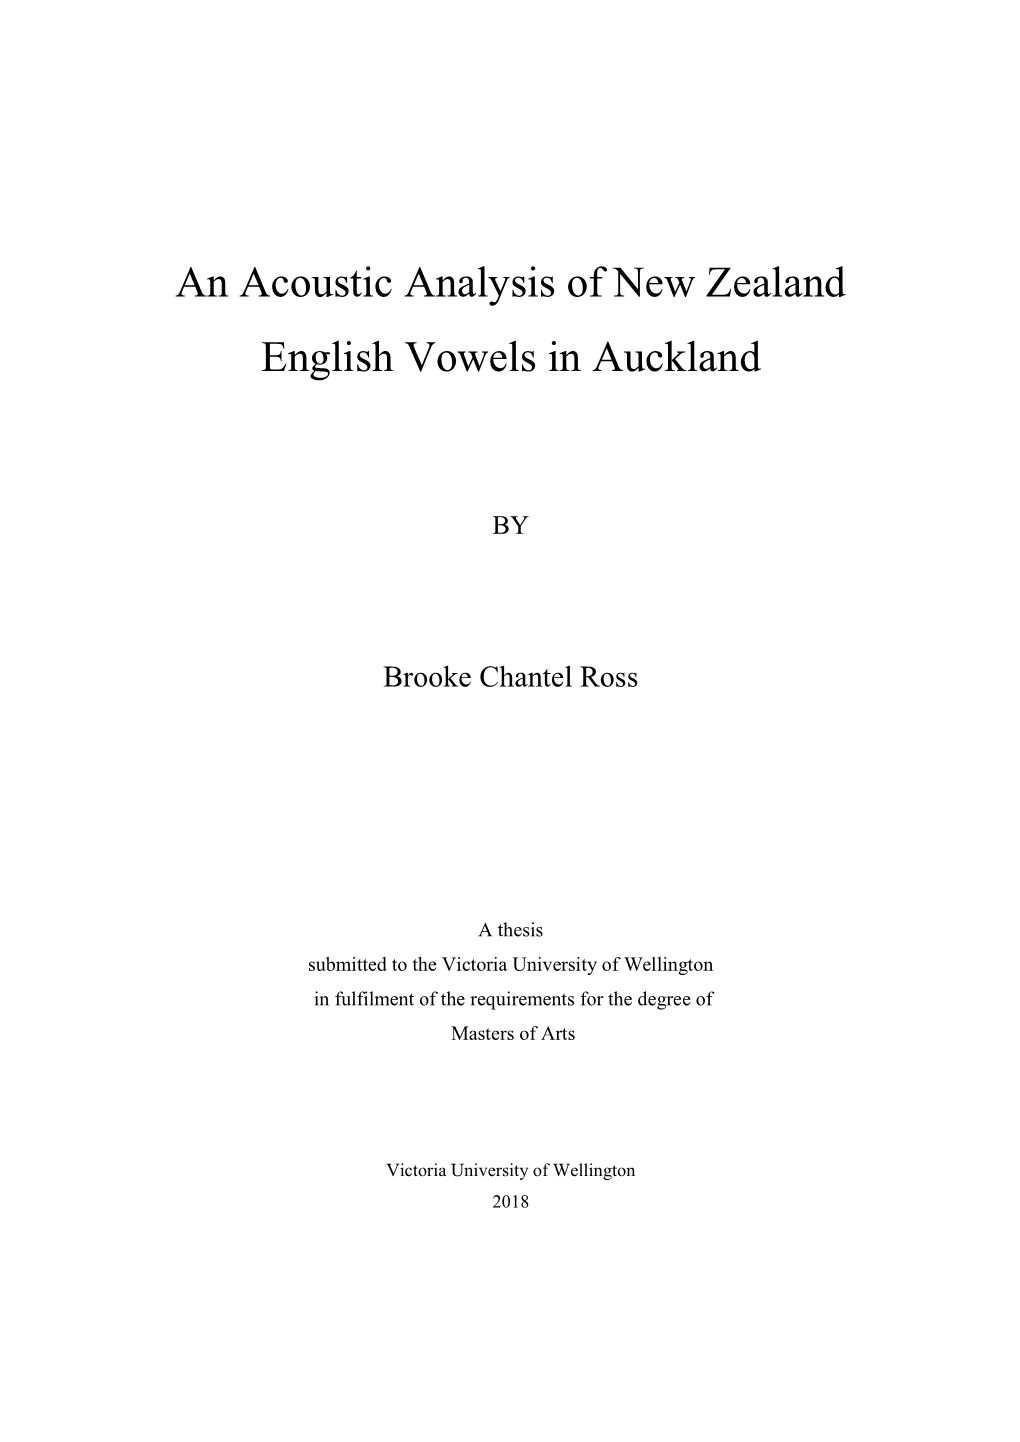 An Acoustic Analysis of New Zealand English Vowels in Auckland